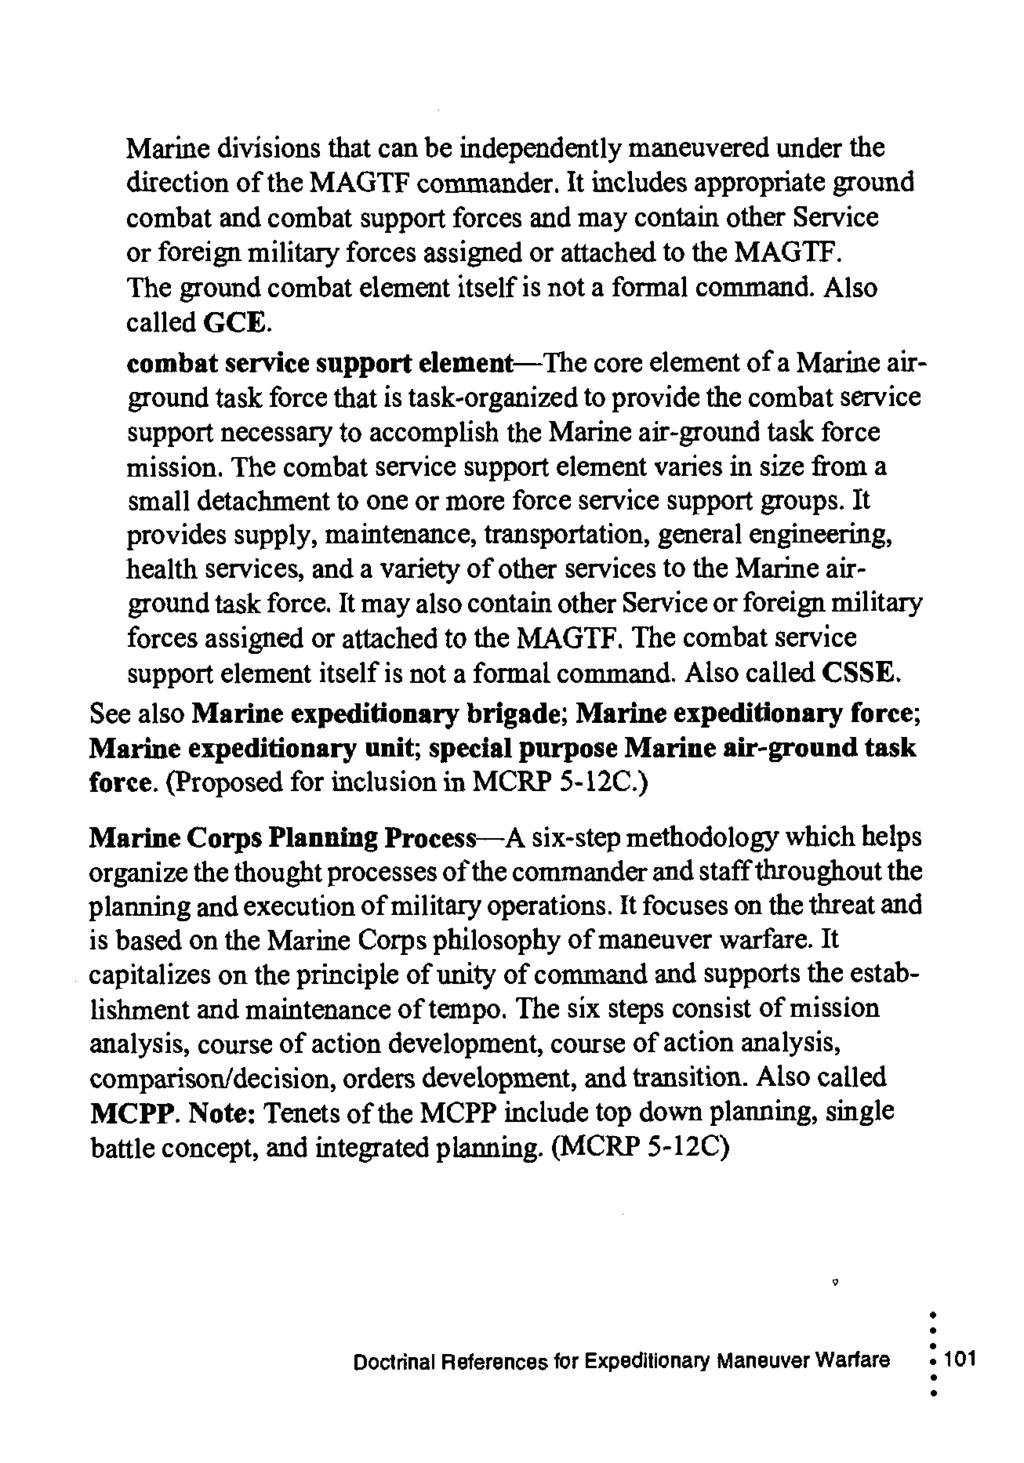 Marine divisions that can be independently maneuvered under the direction of the MAGTF commander.